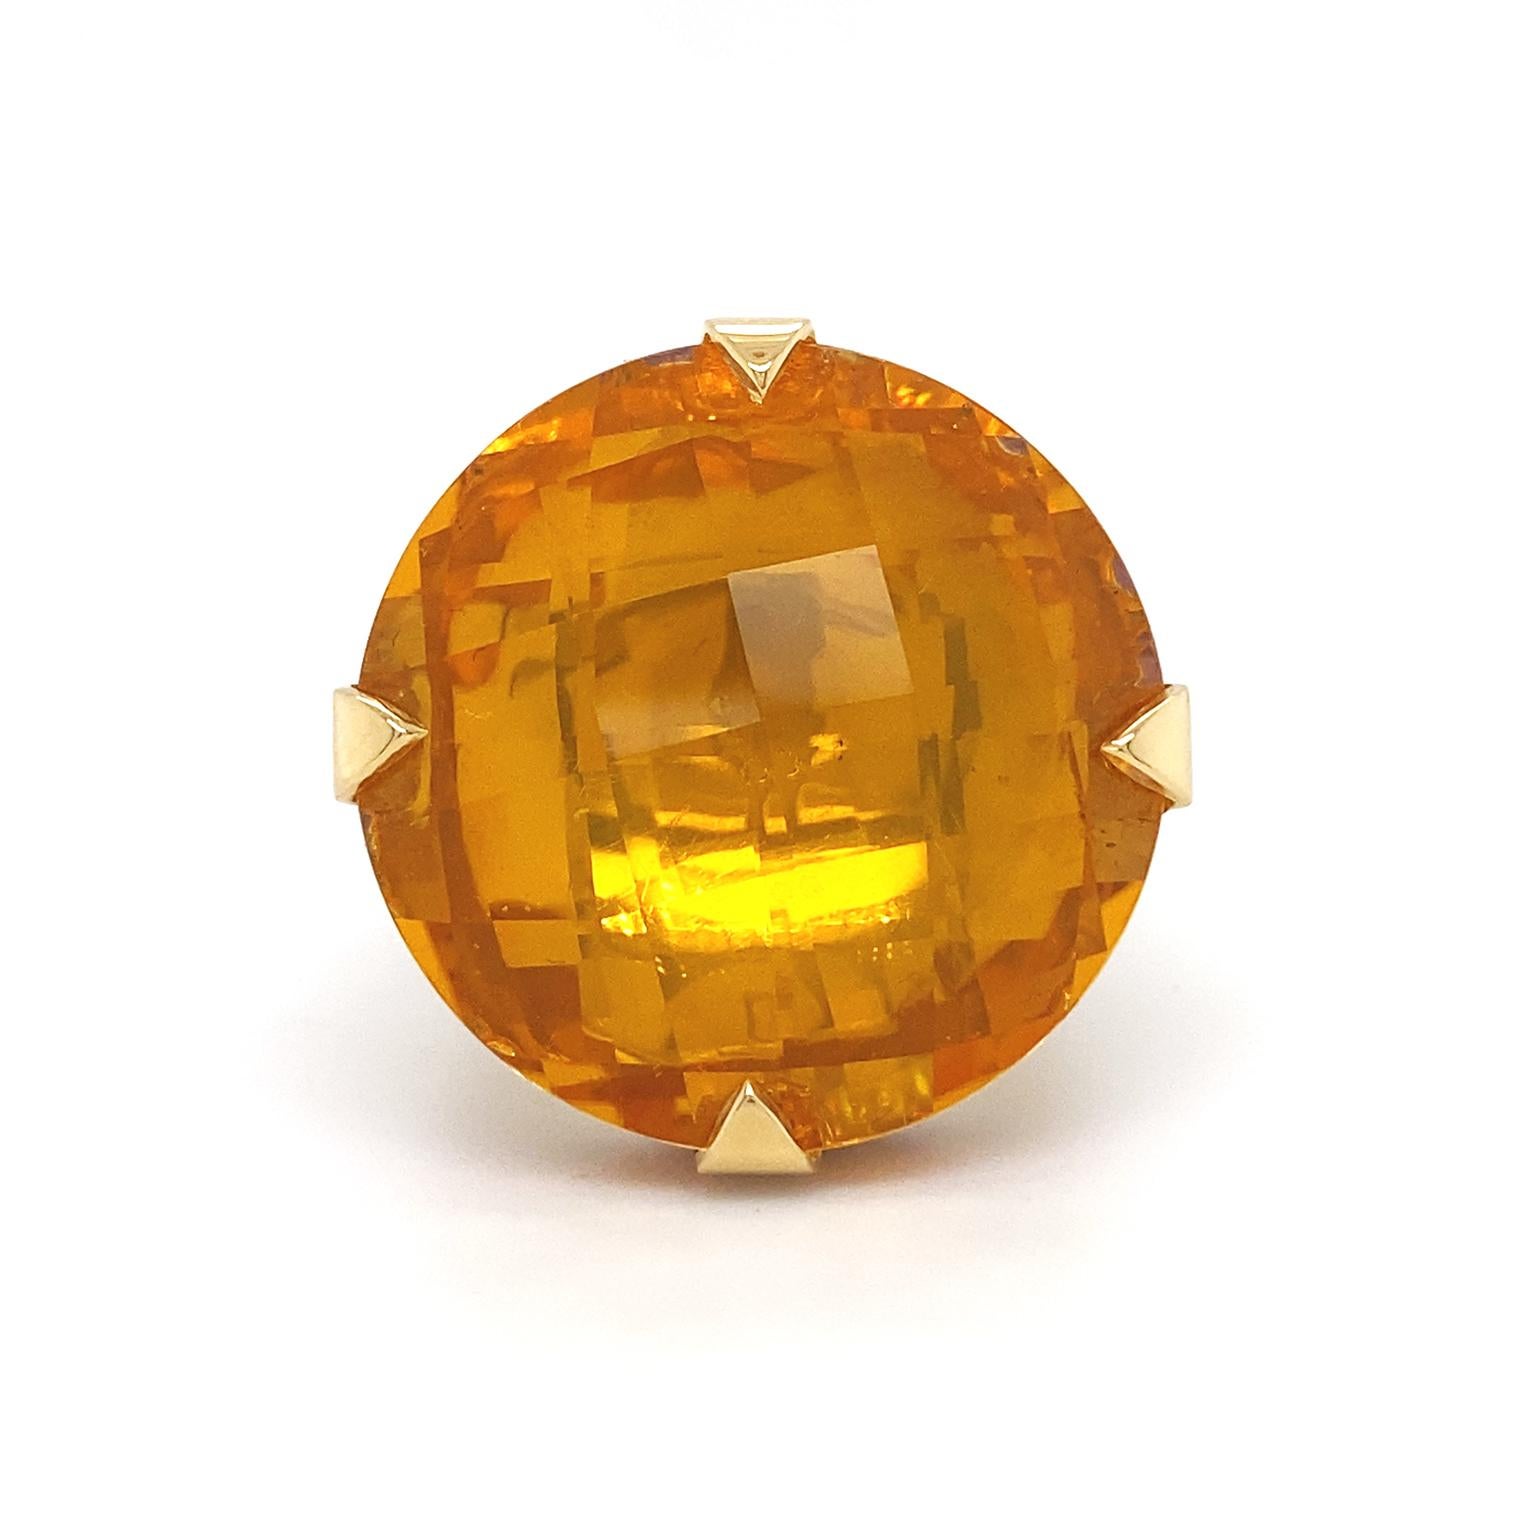 A complimentary trio of colors unifies. Beginning with the burning orange of citrine, it is the culmination of this ring. A checkerboard cut provides more luster. 18k yellow gold prongs secure the citrine. Circling below is a pavé set crown of